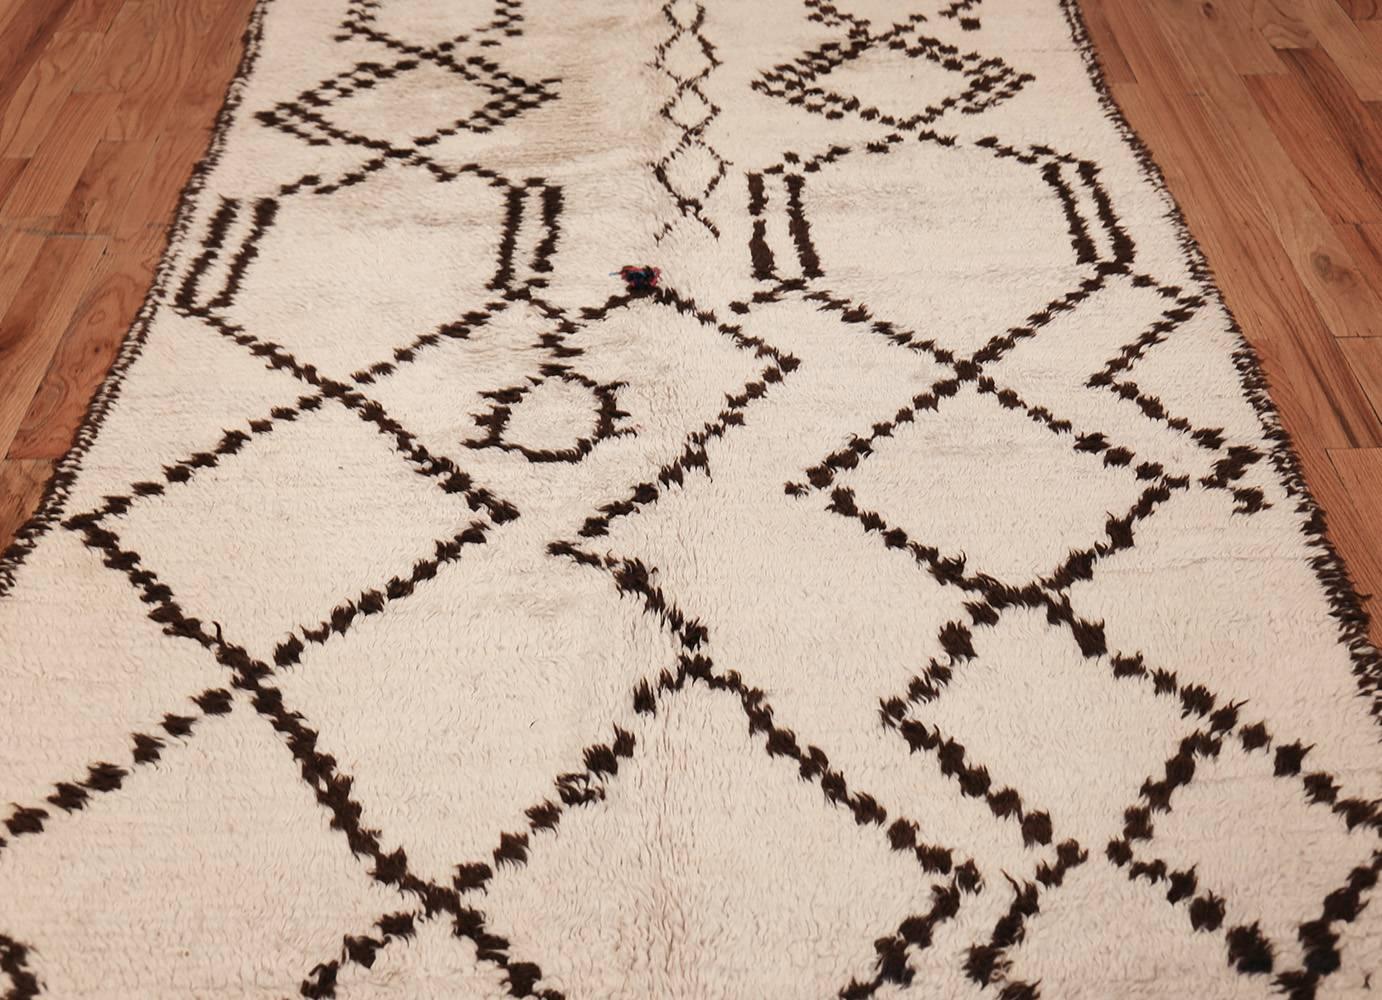 Vintage Moroccan Rug, Origin: Morocco, Circa: Mid 20th Century – Size: 4 ft 6 in x 10 ft 6 in (1.37 m x 3.2 m)

Woven in Morocco during the mid-20th century, this extraordinary vintage rug showcases an inventive composition with multiple large-scale